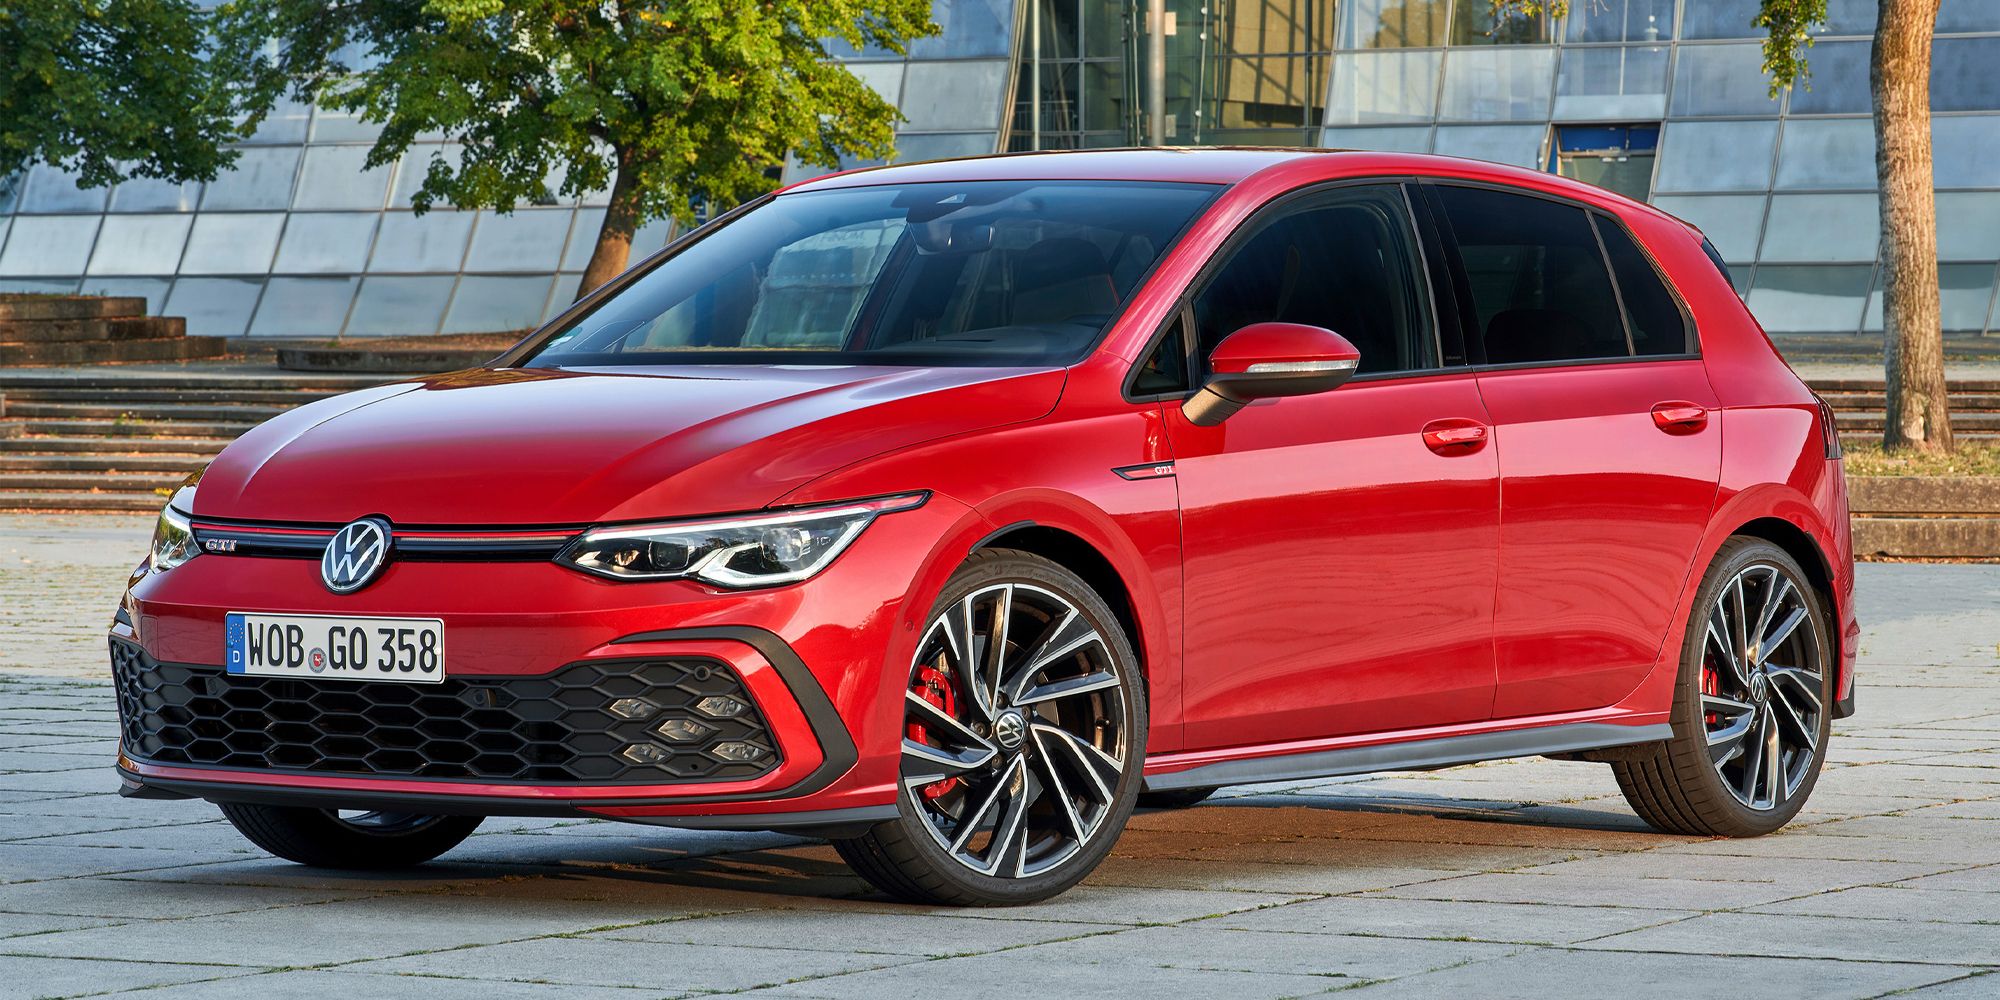 The new Mk8 Golf GTI in red